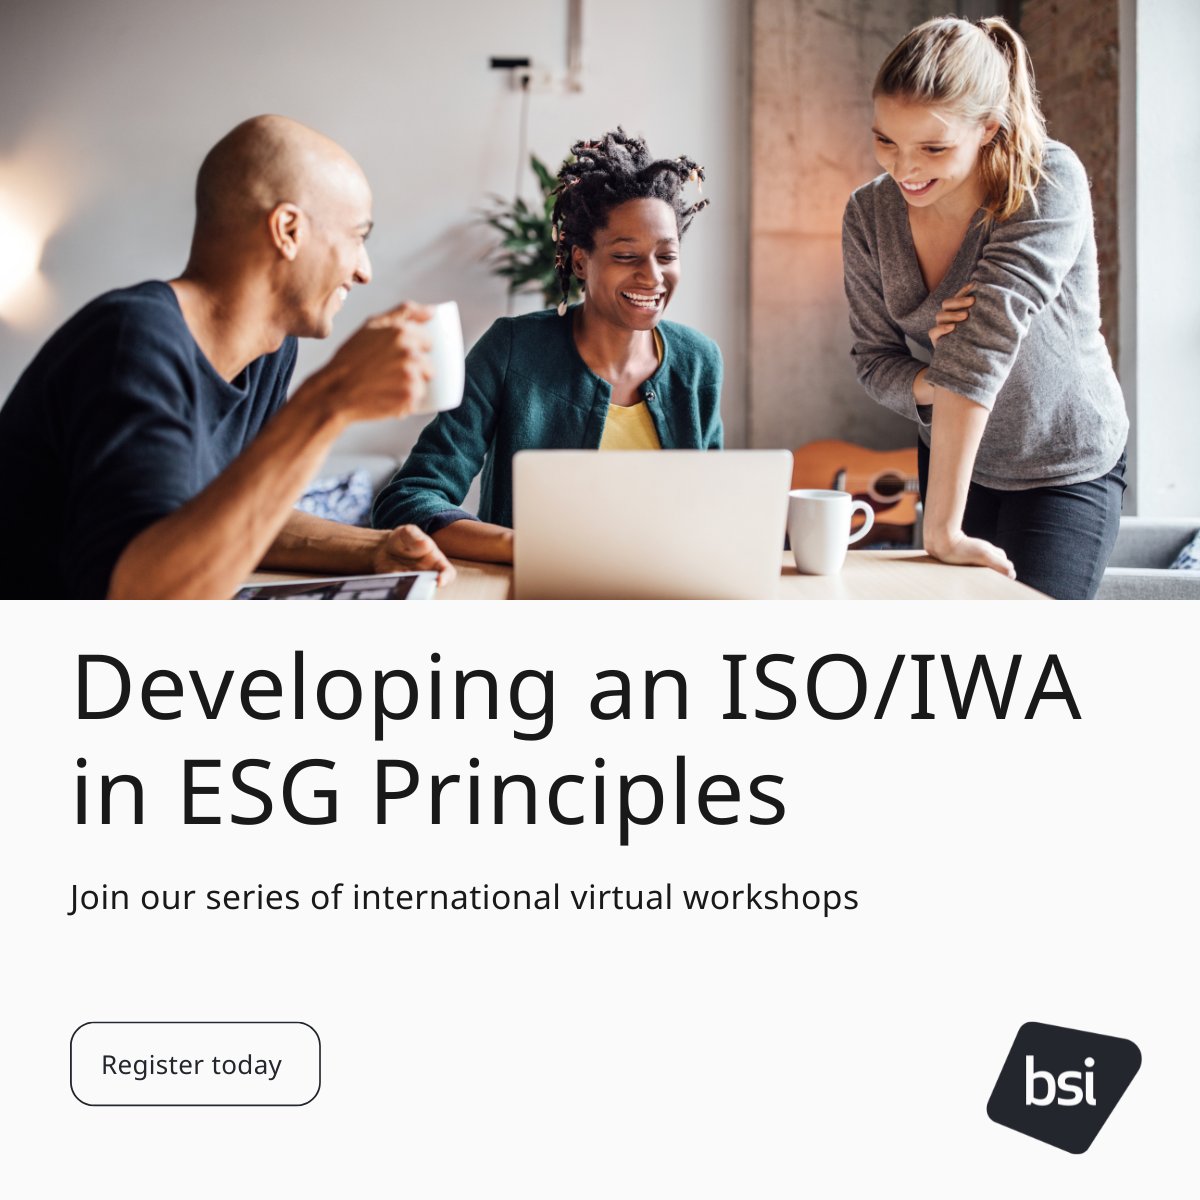 Our international virtual workshops for developing an #IWA in #ESG Principles are open for registration. No matter where you are, your voice matters in shaping global standards for sustainability. Sign up now: bit.ly/3IV7mRu #BSIStandards #ISO #Sustainability